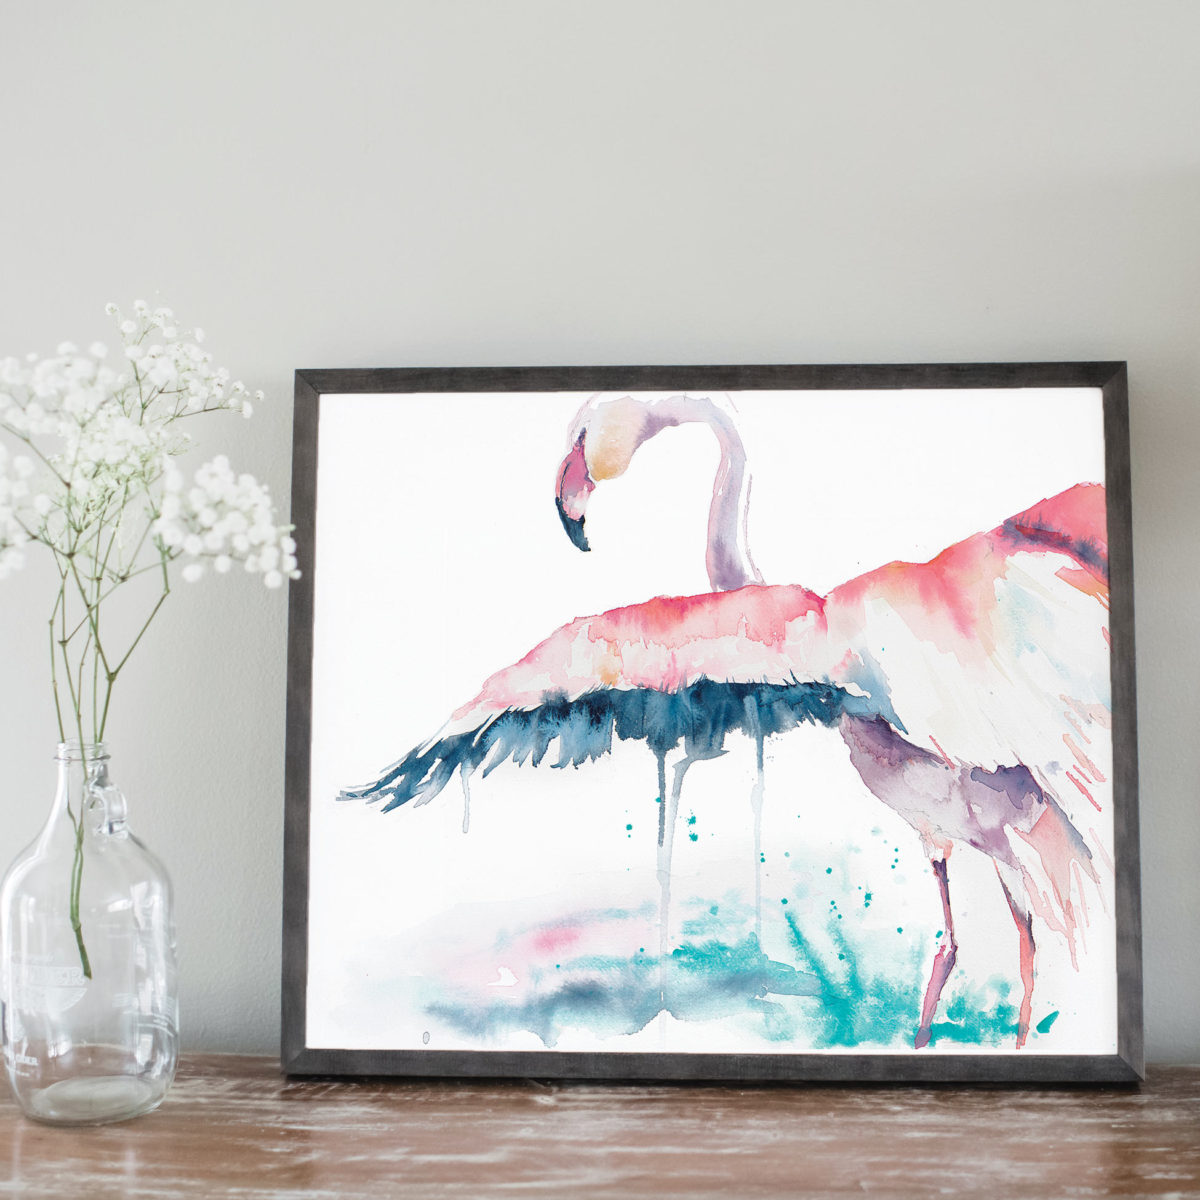 Watercolor of flamingo with wing spread in gray frame